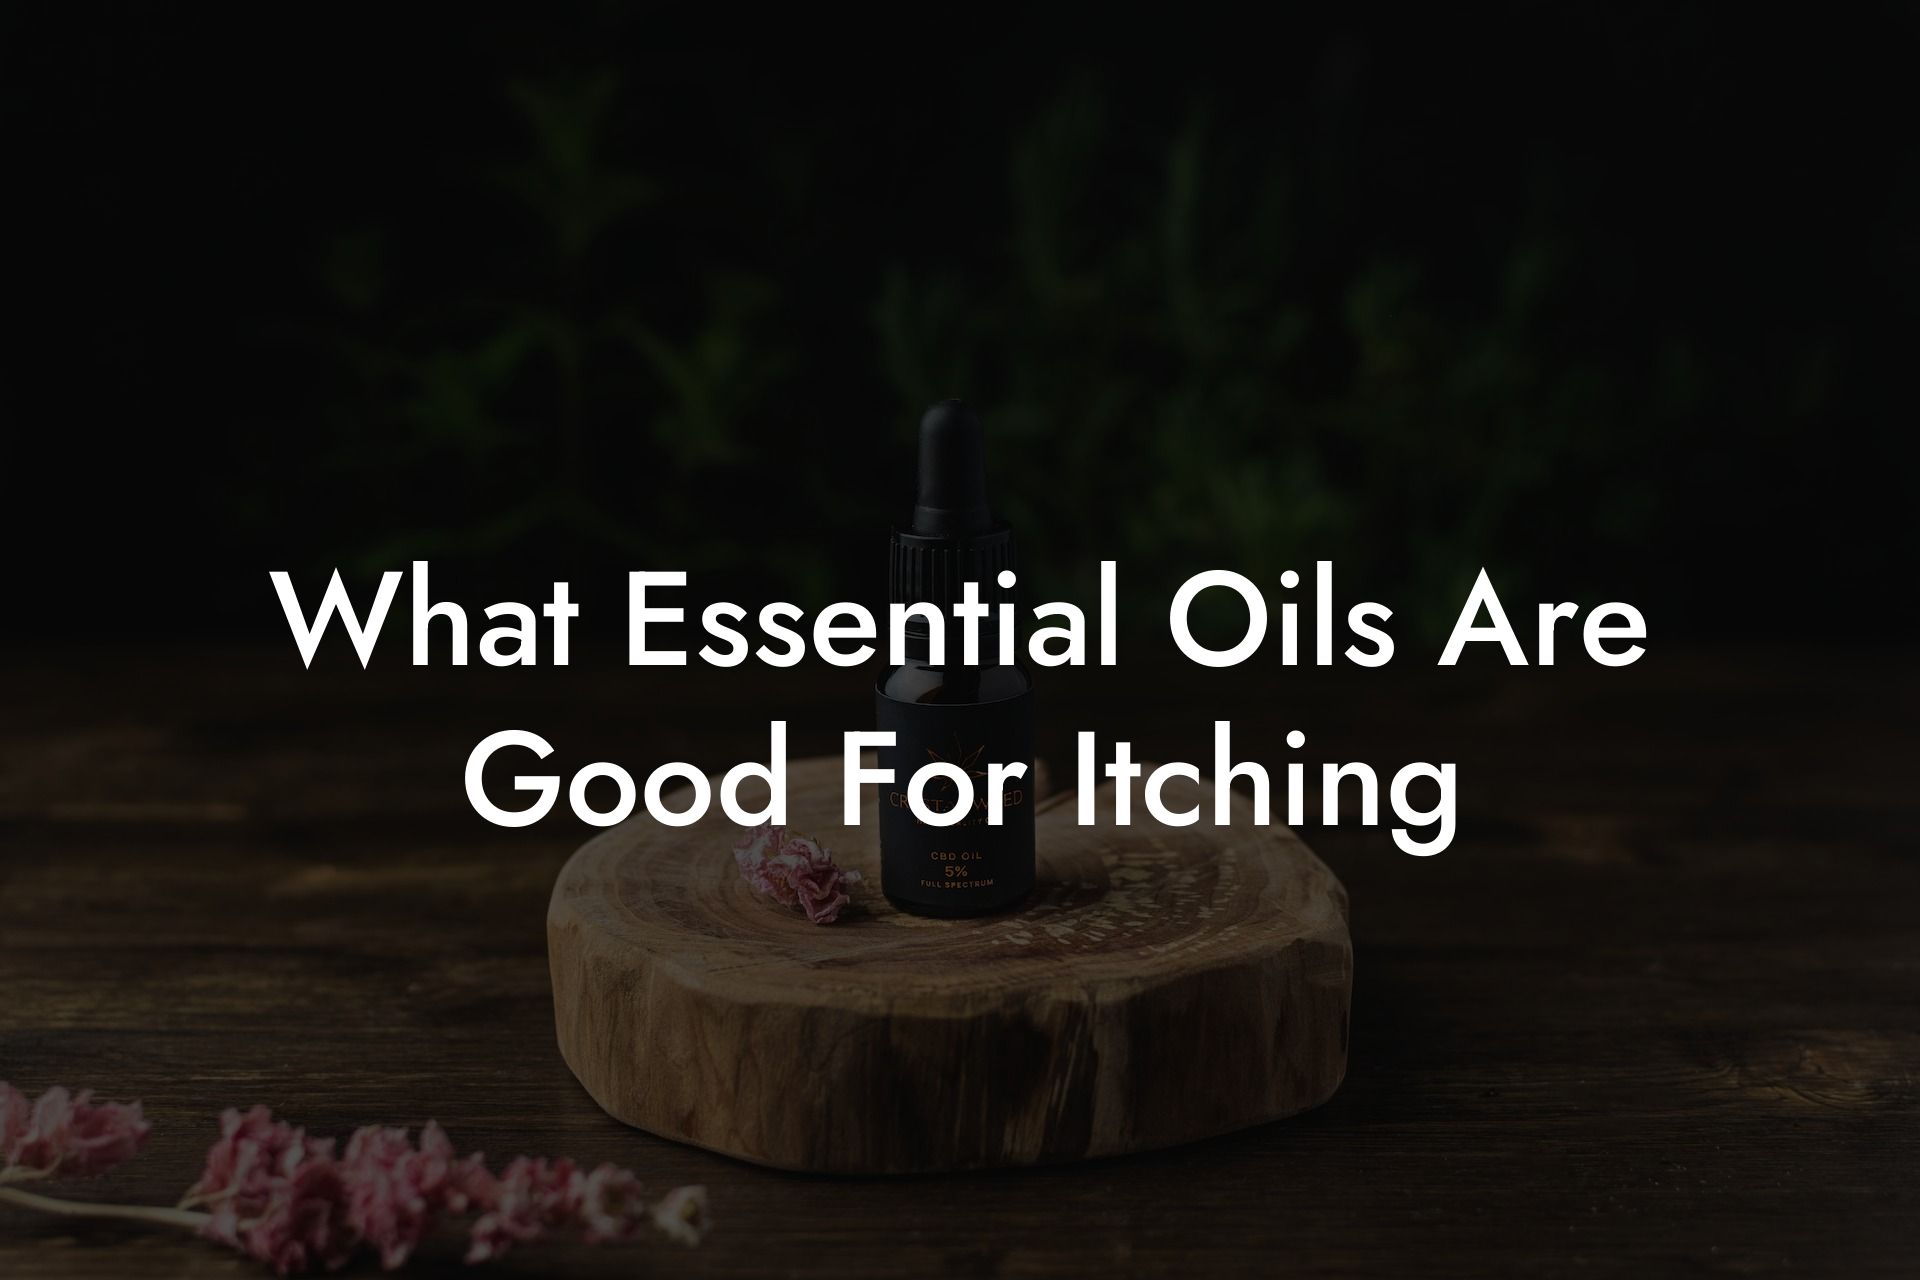 What Essential Oils Are Good For Itching